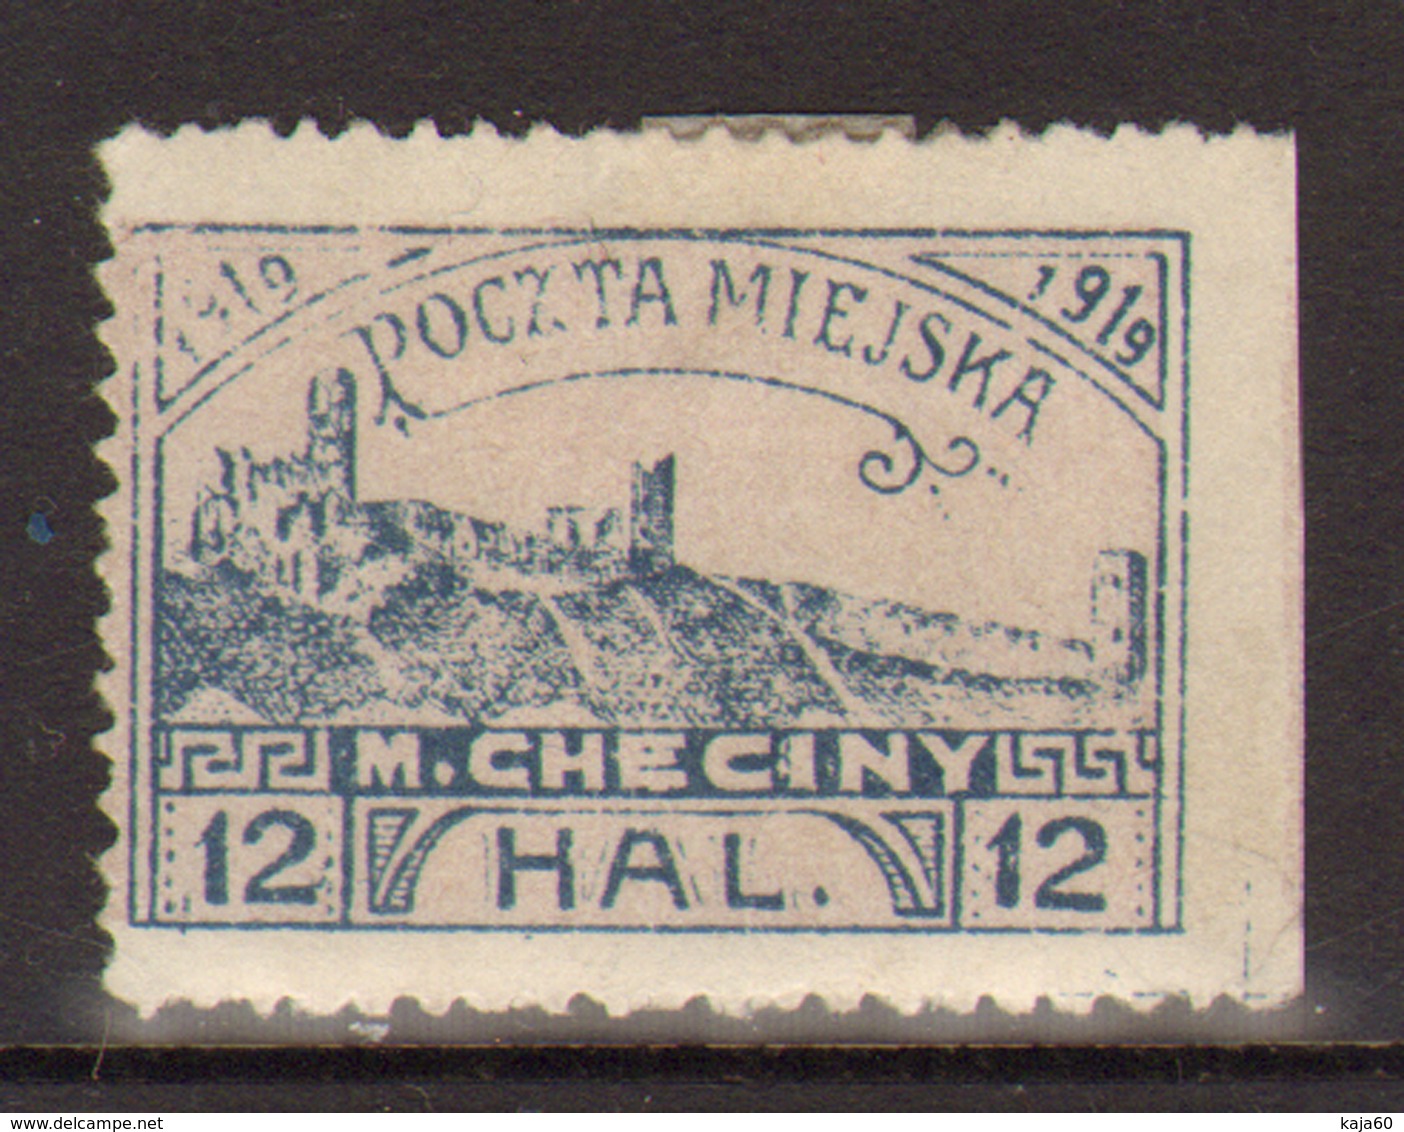 6. Poland 1919 June Checiny Local Philatelic Issue 12h Mint Perf Variety - Unused Stamps